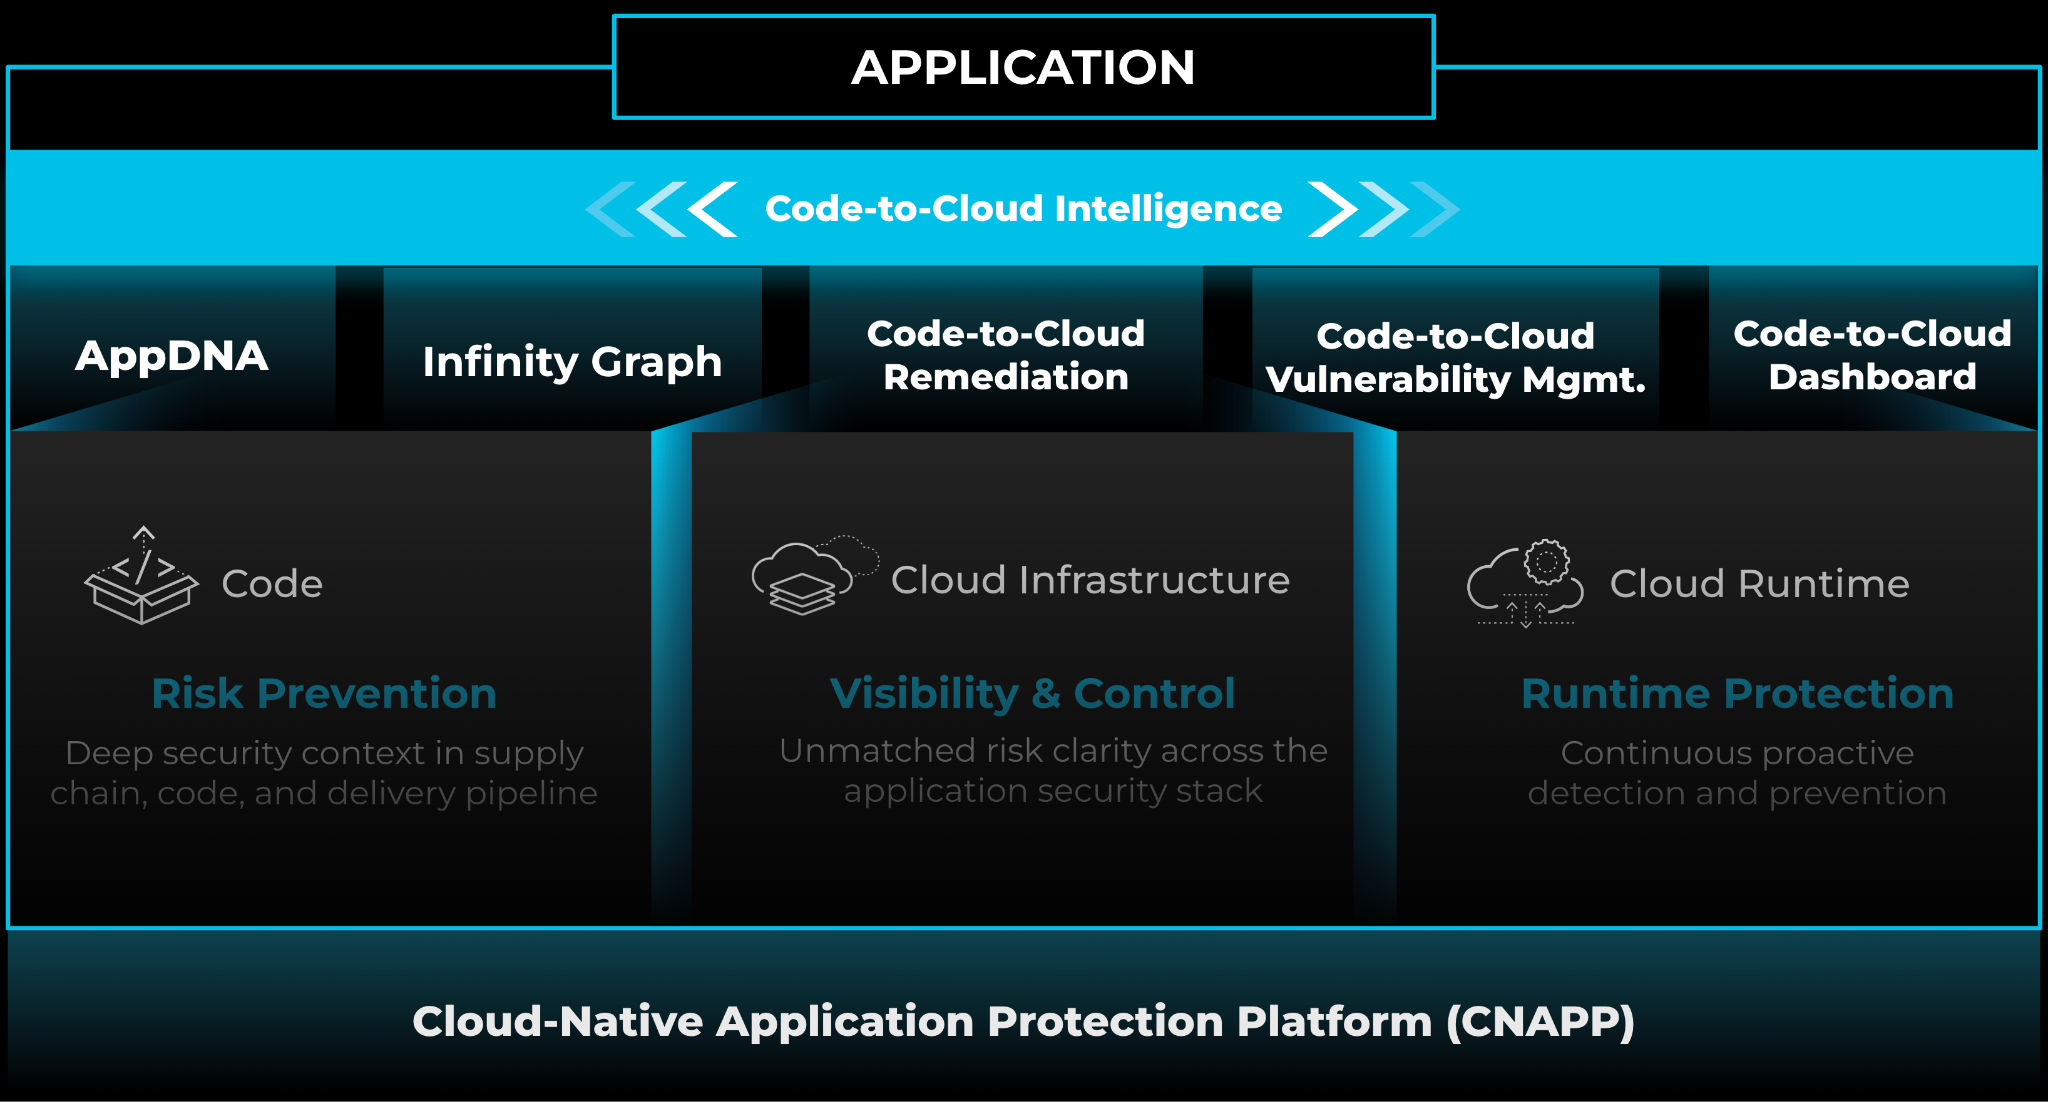 Code-to-Cloud intelligence application, showing AppDNA, Infinity Graphy, Remediation, Vulnerability Mgmt, and the dashboard.